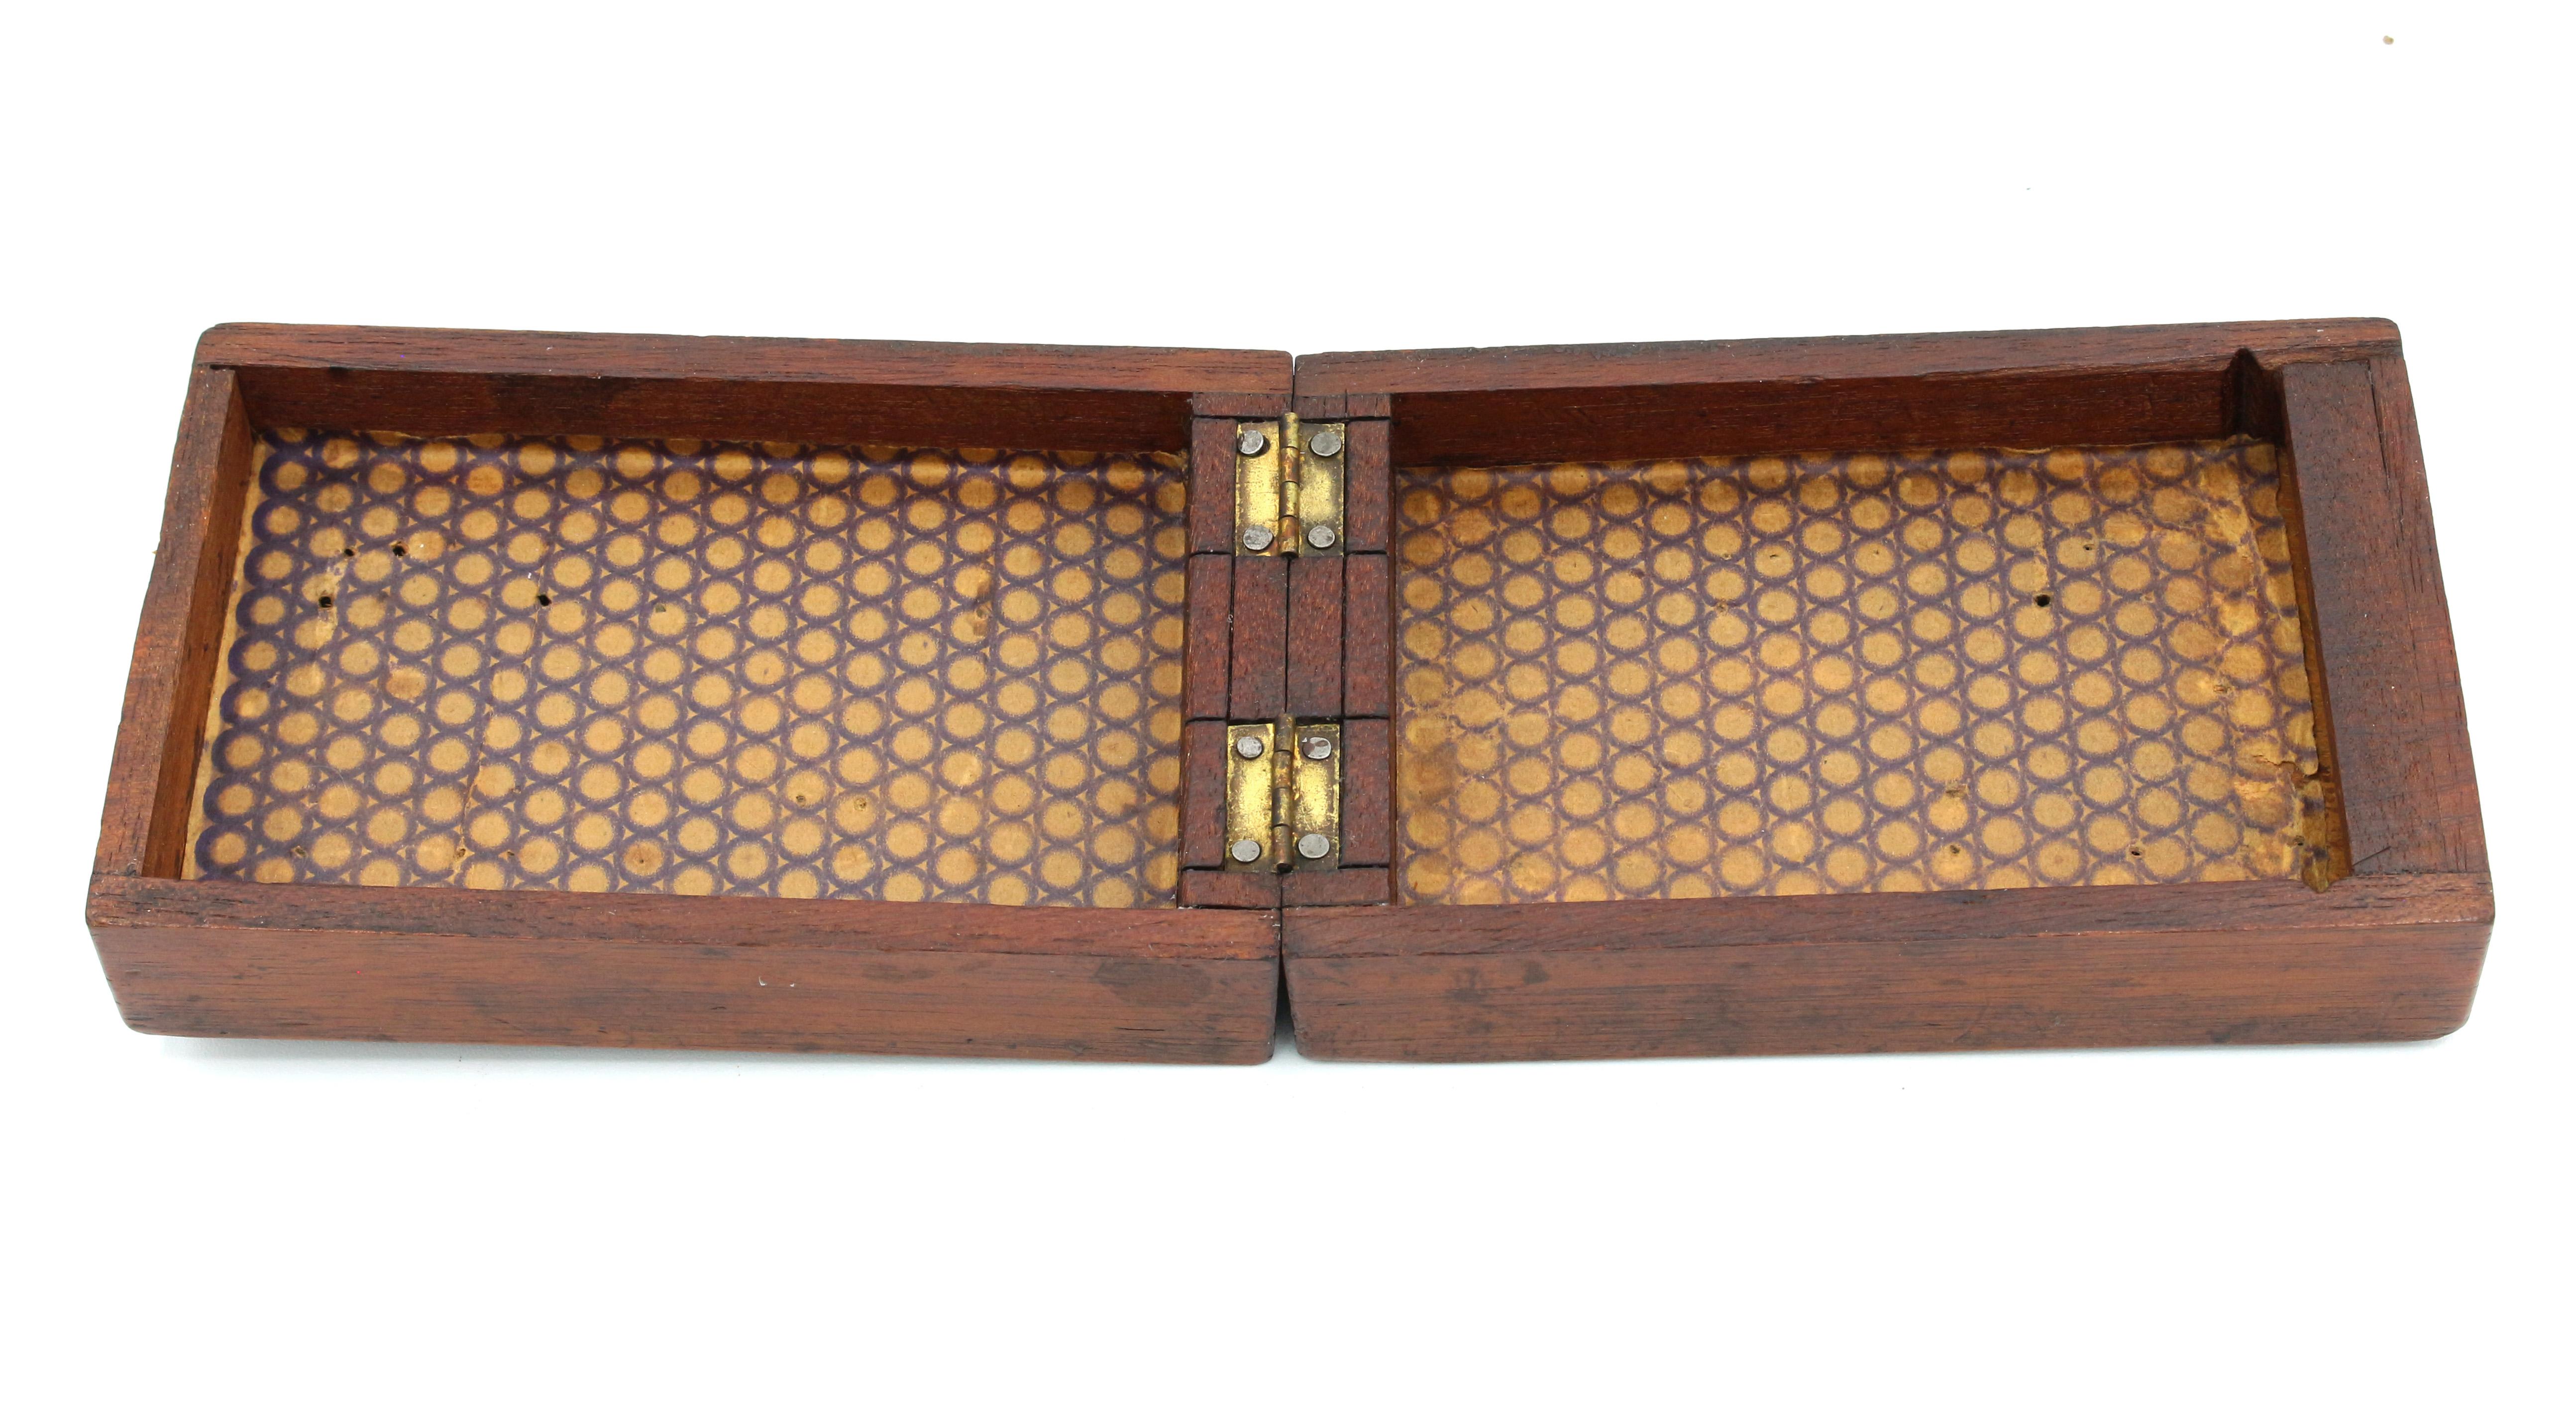 Wood Late 19th-Early 20th Century Travel Folding Cribbage Board Box